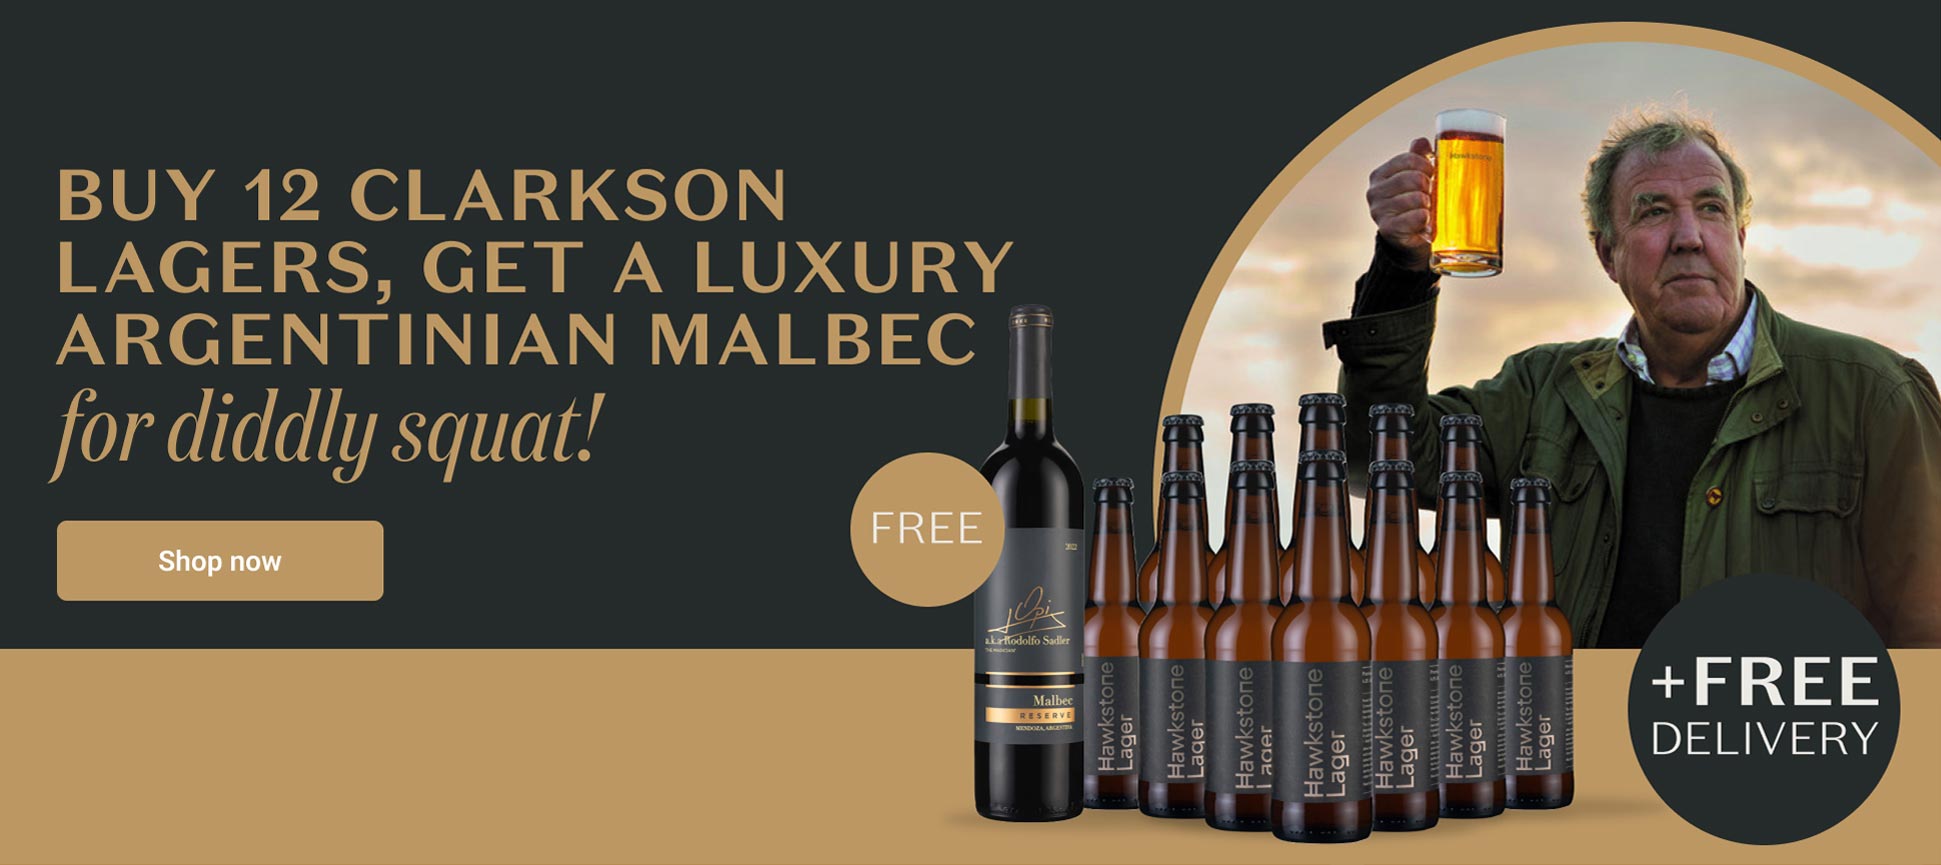 Buy 12 Clarkson lagers, get a luxury Argentinian Malbec